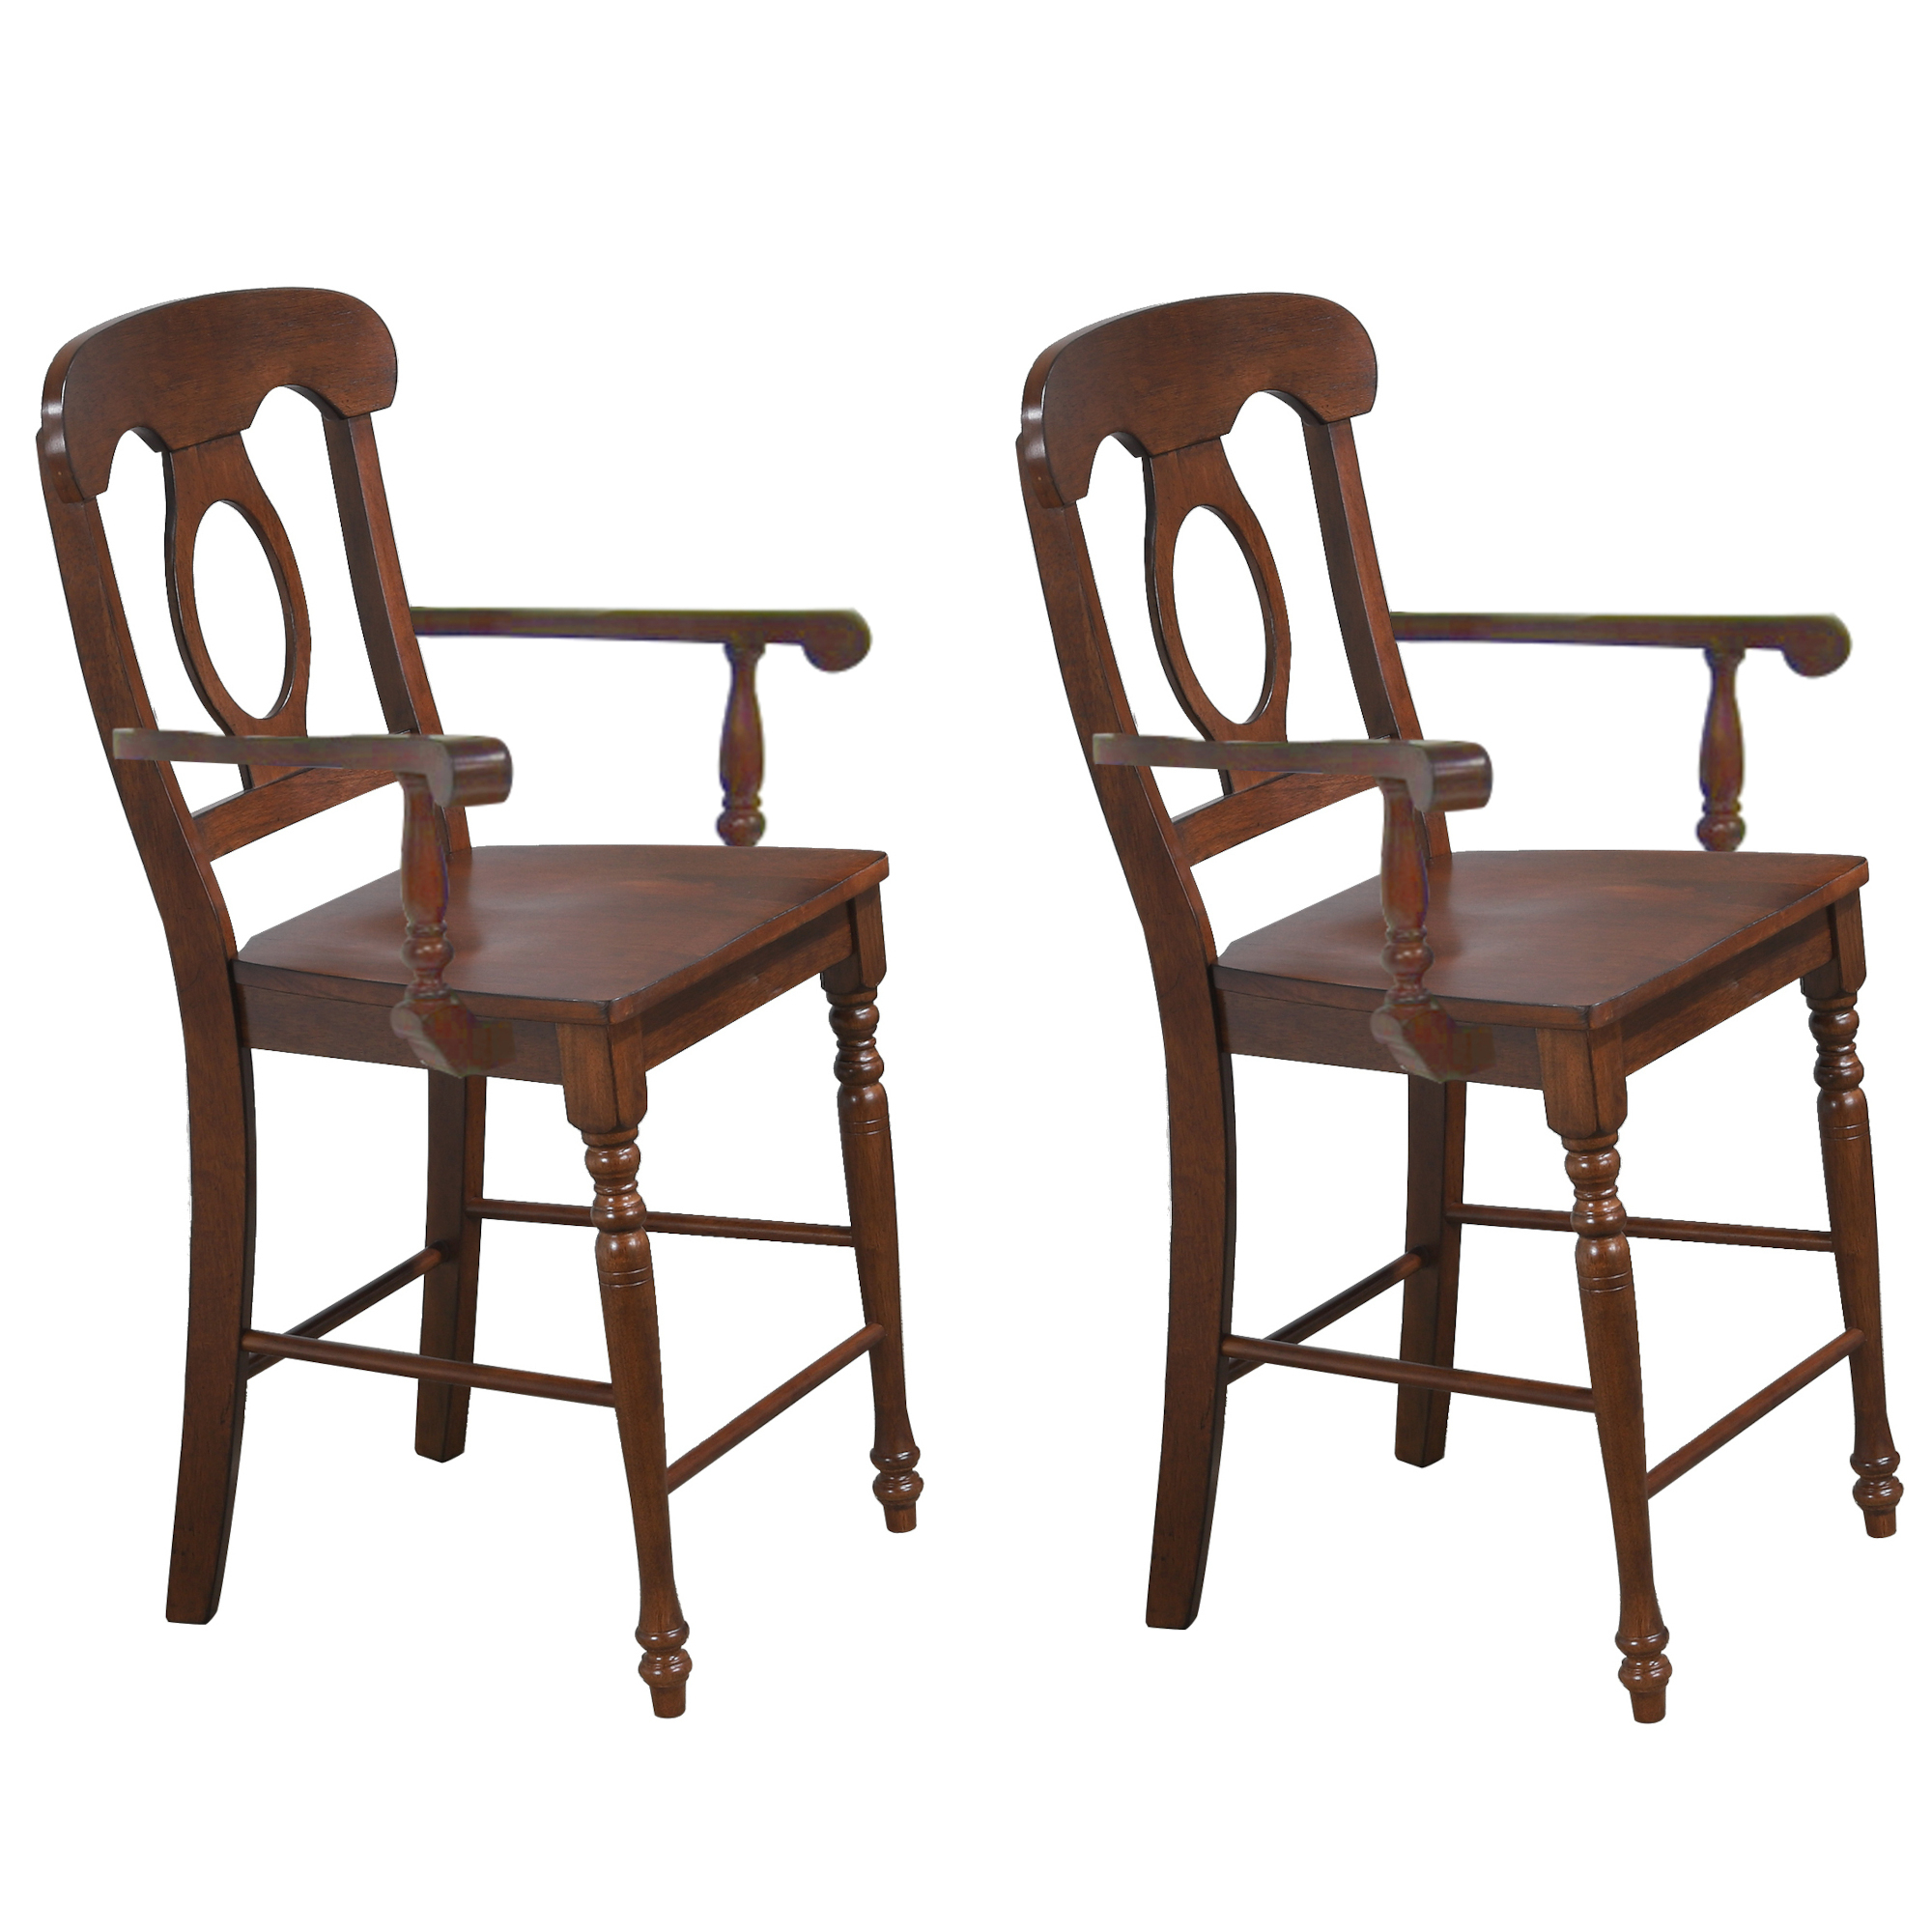 Andrews Bravo 42.5 in. High Back 24 in. Bar Stool with Solid Wood Seat (Set of 2) - Distressed Chestnut Brown